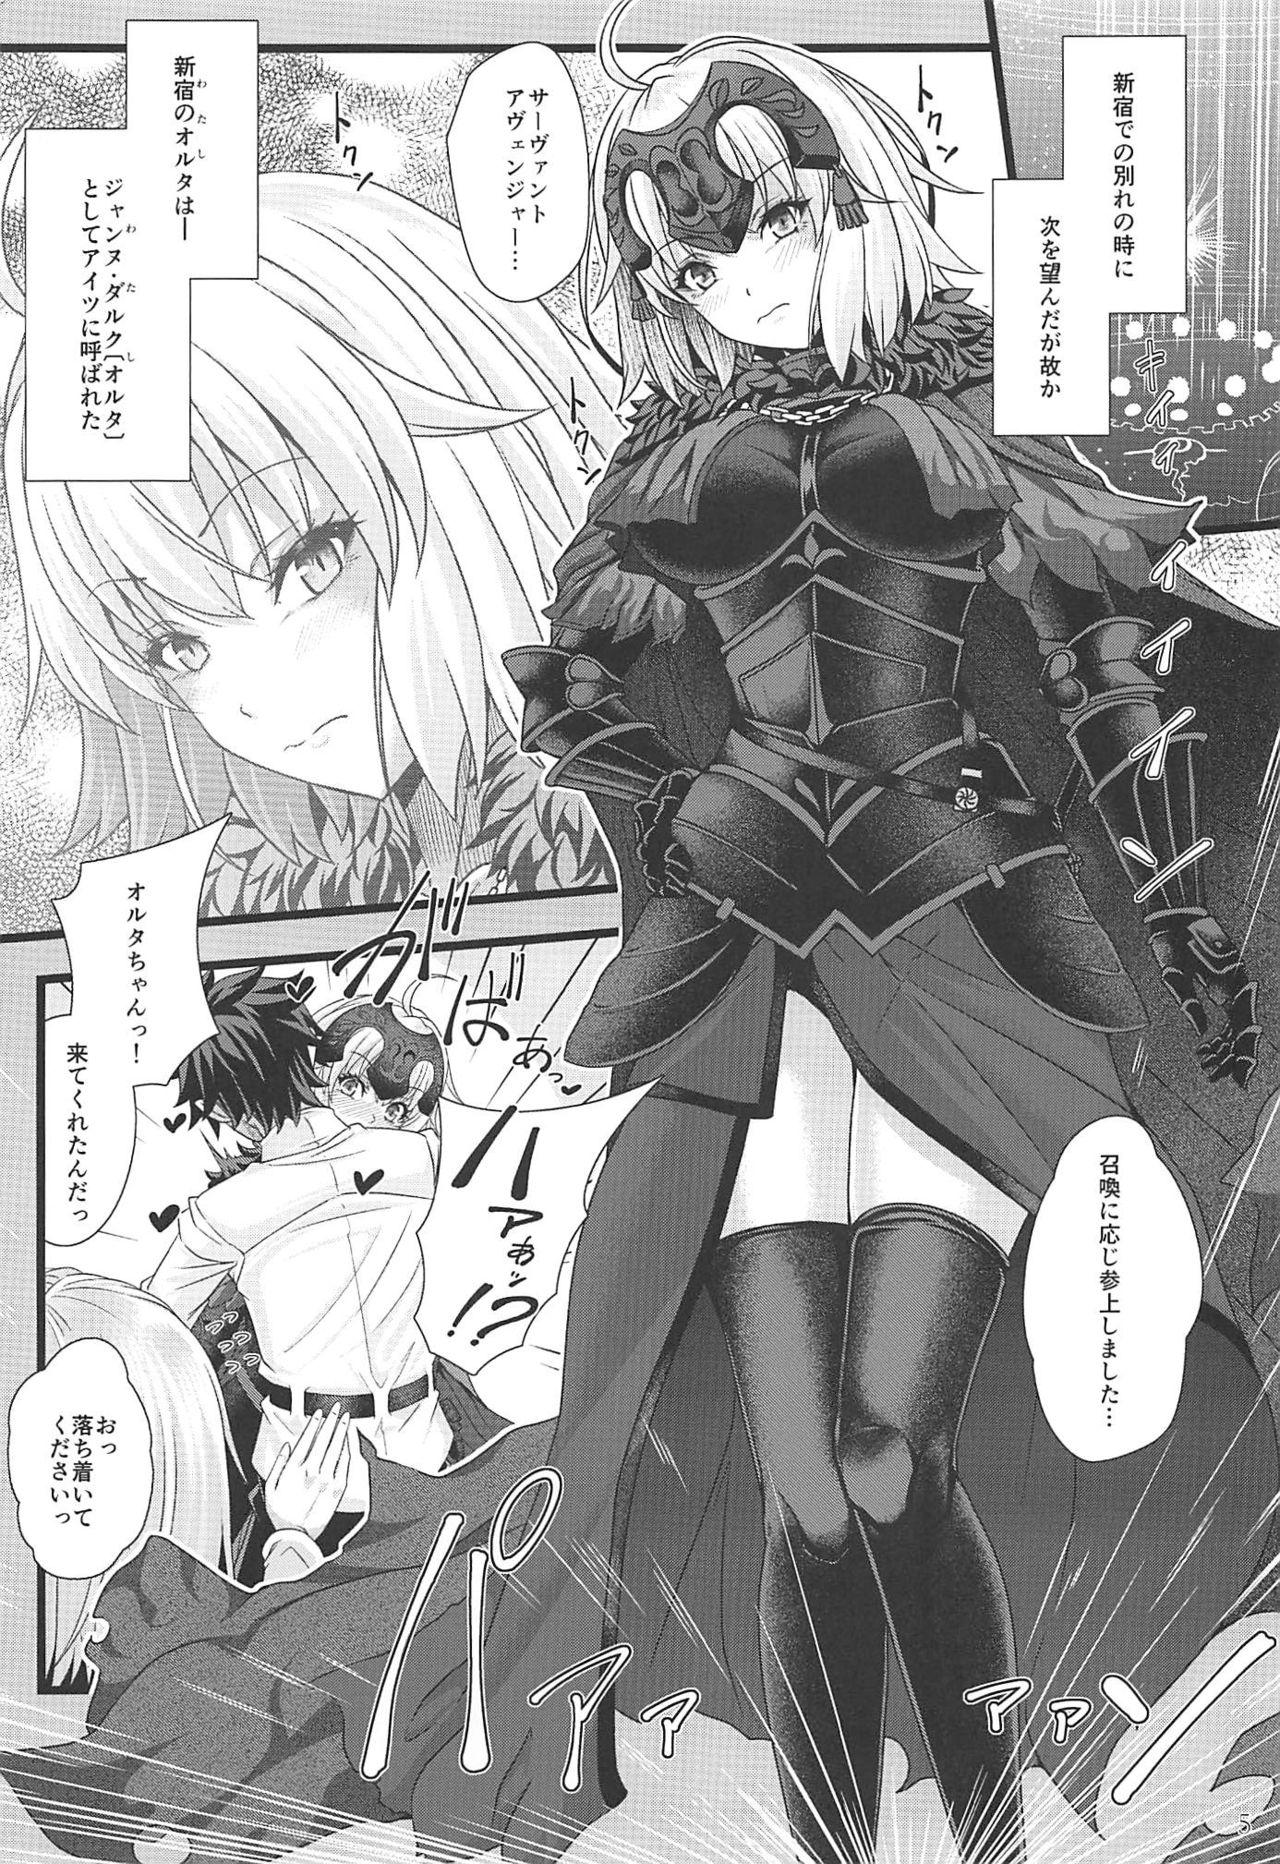 Men ROMANCE - Fate grand order Colombian - Page 4